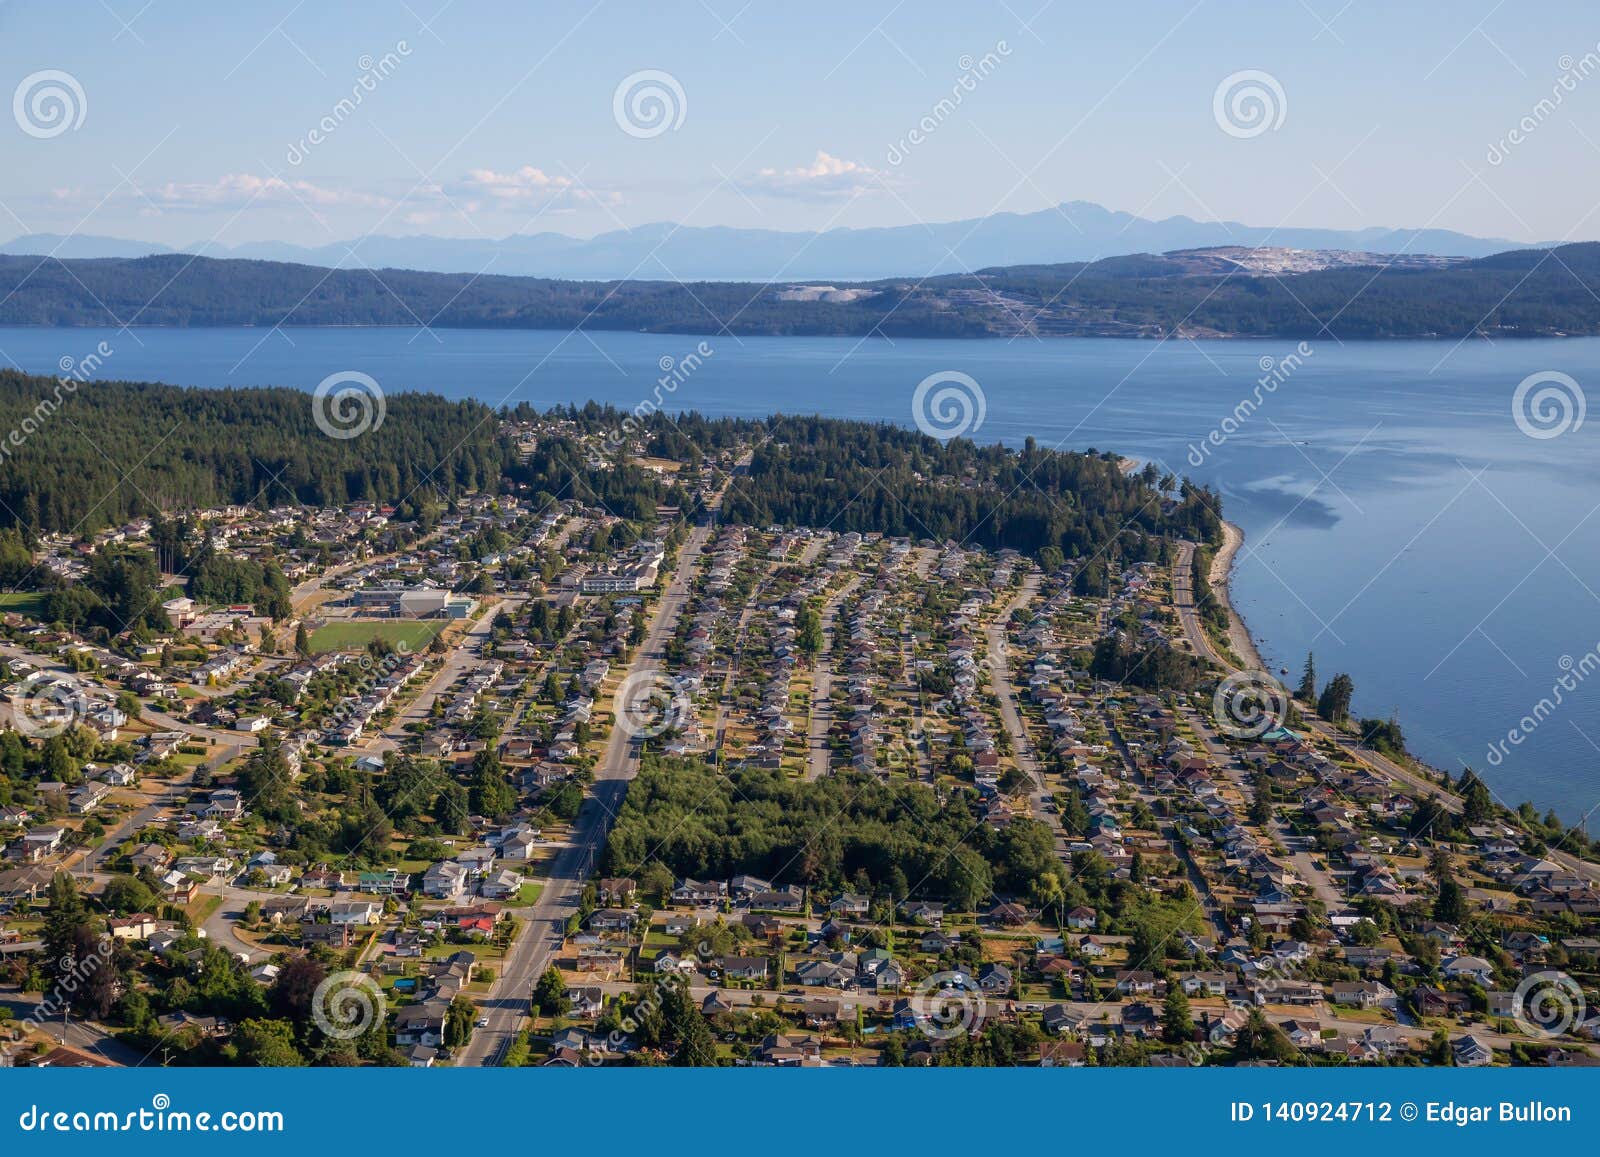 aerial view of powell river